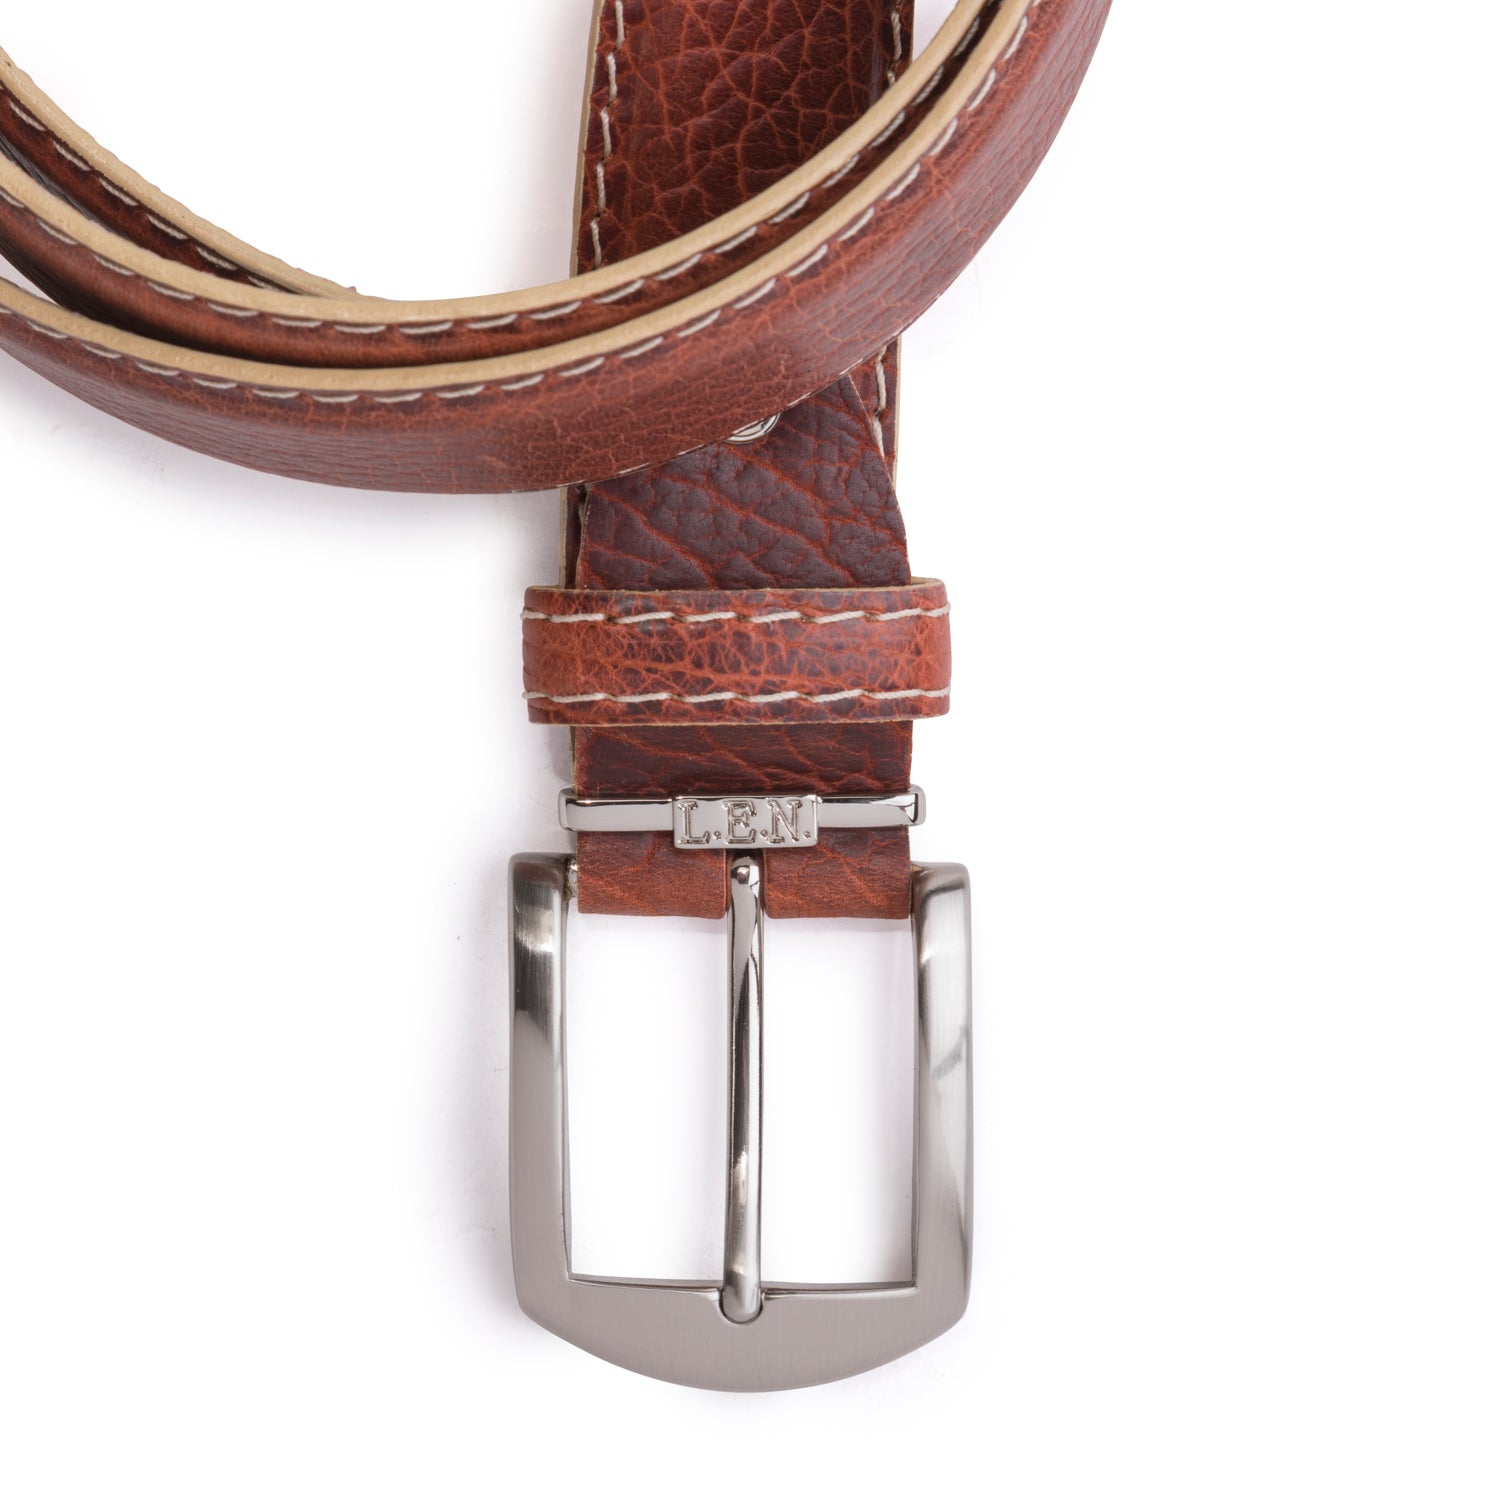 American Bison Belt in Cognac with Beige Stitching by L.E.N. Bespoke